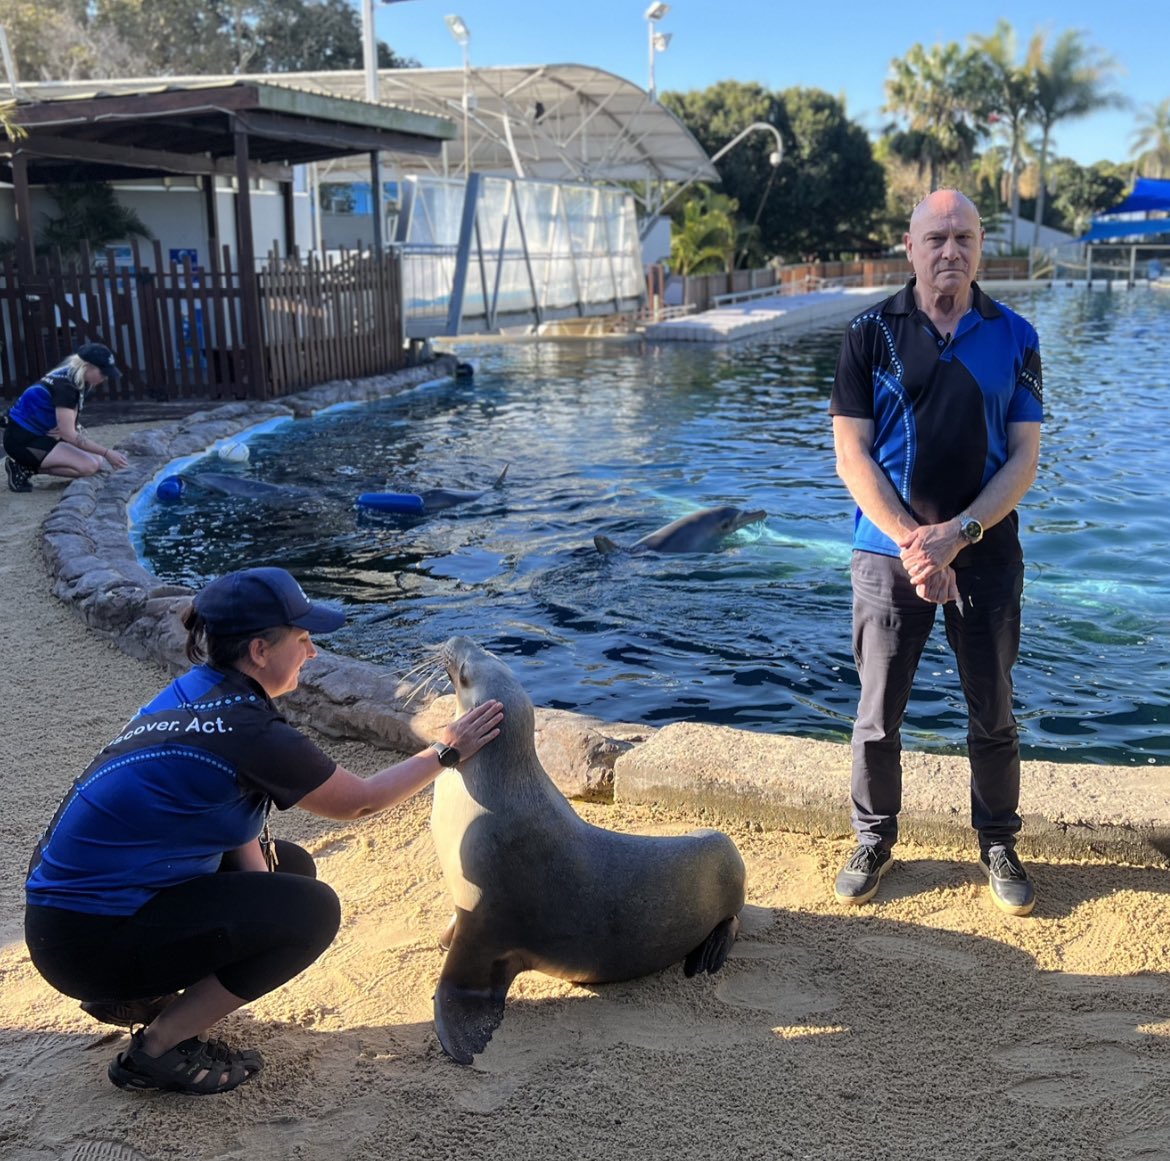 Had the unfortunate privilege to speak with the folk at Dolphin Marine Conservation Park as they announced they were going into administration today